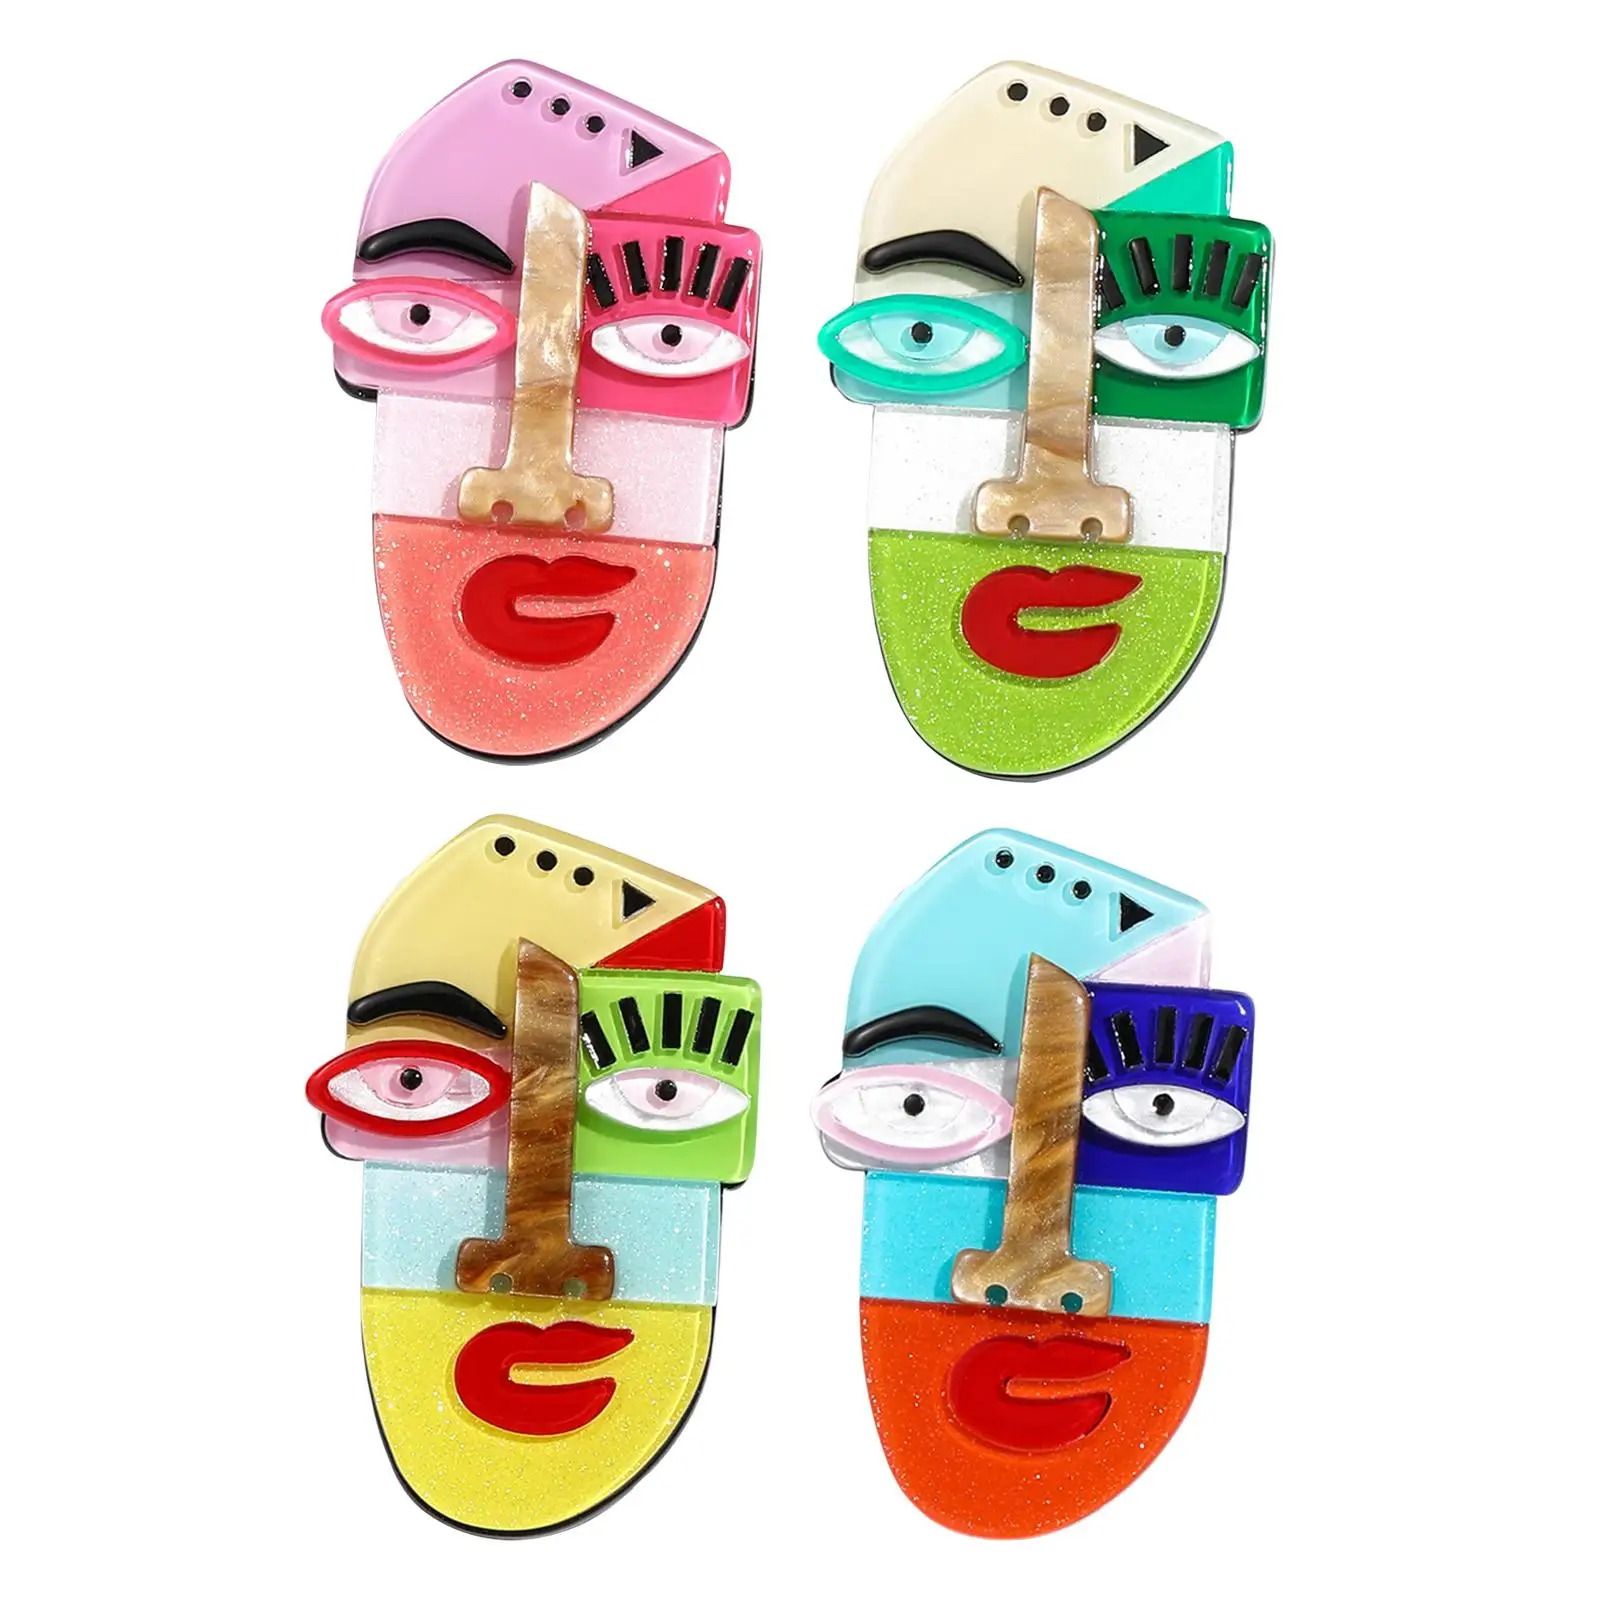 Acrylic Brooch Cartoon Jewelry Abstract Face Aesthetic Brooches Modern Fashion for Hats Clothes Bags Backpacks DIY